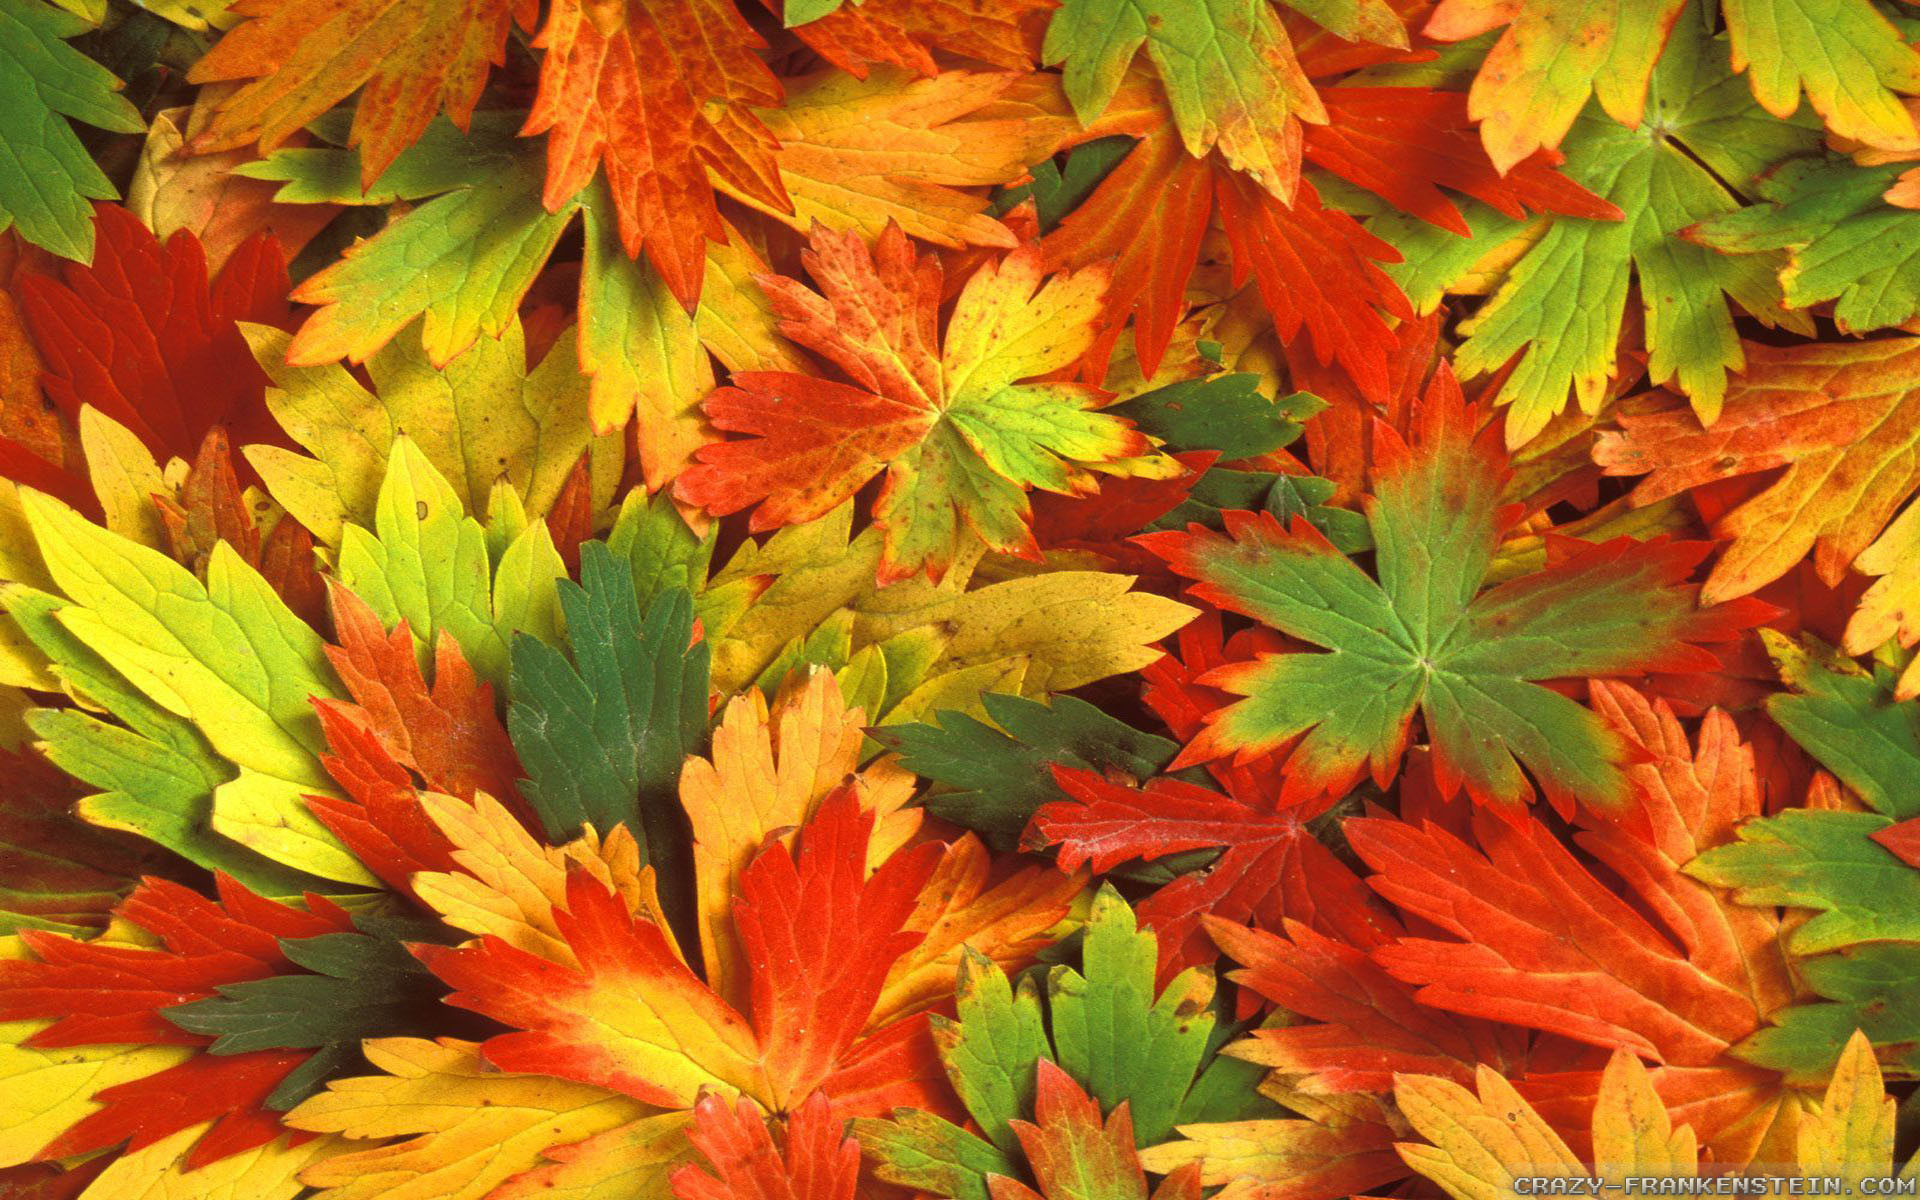 1920x1200 Wallpaper: Fall Leaves wallpapers 2. Resolution: 1024x768 | 1280x1024 |  1600x1200. Widescreen Res: 1440x900 | 1680x1050 | 